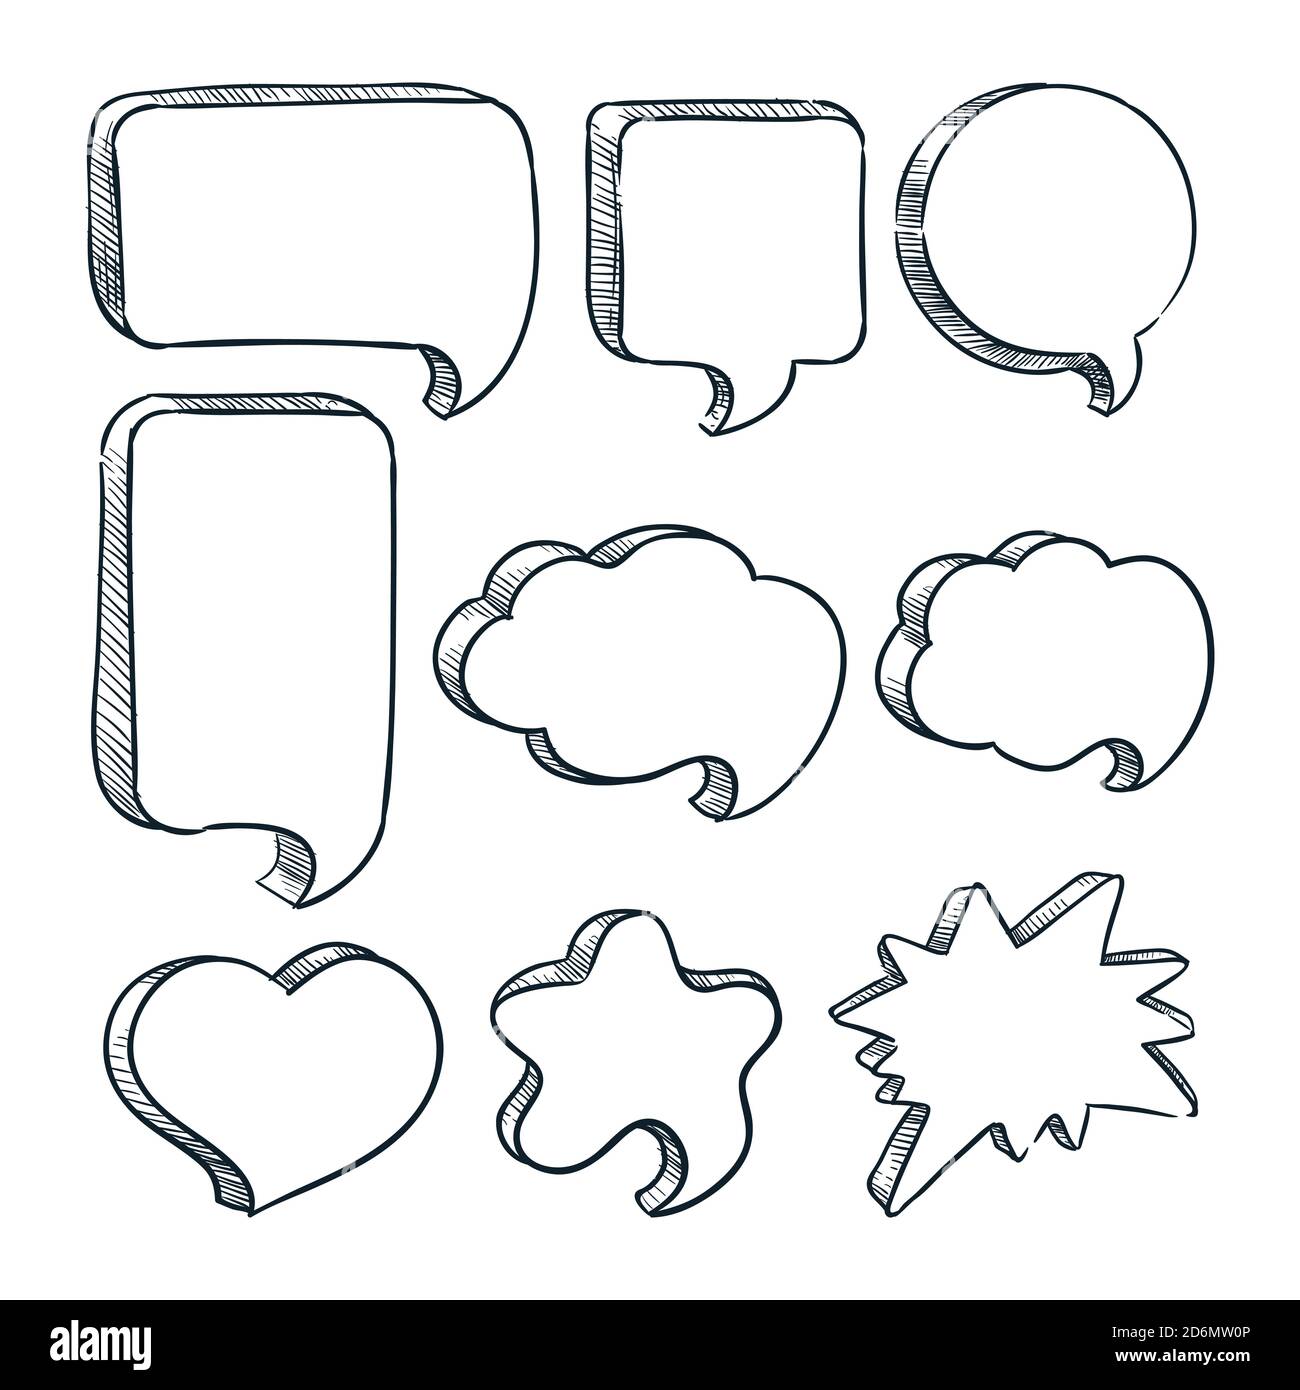 Blank speech bubbles frames with copy space. Vector sketch illustration. Hand drawn comic empty clouds with place for text. Dialog icons, stickers or Stock Vector